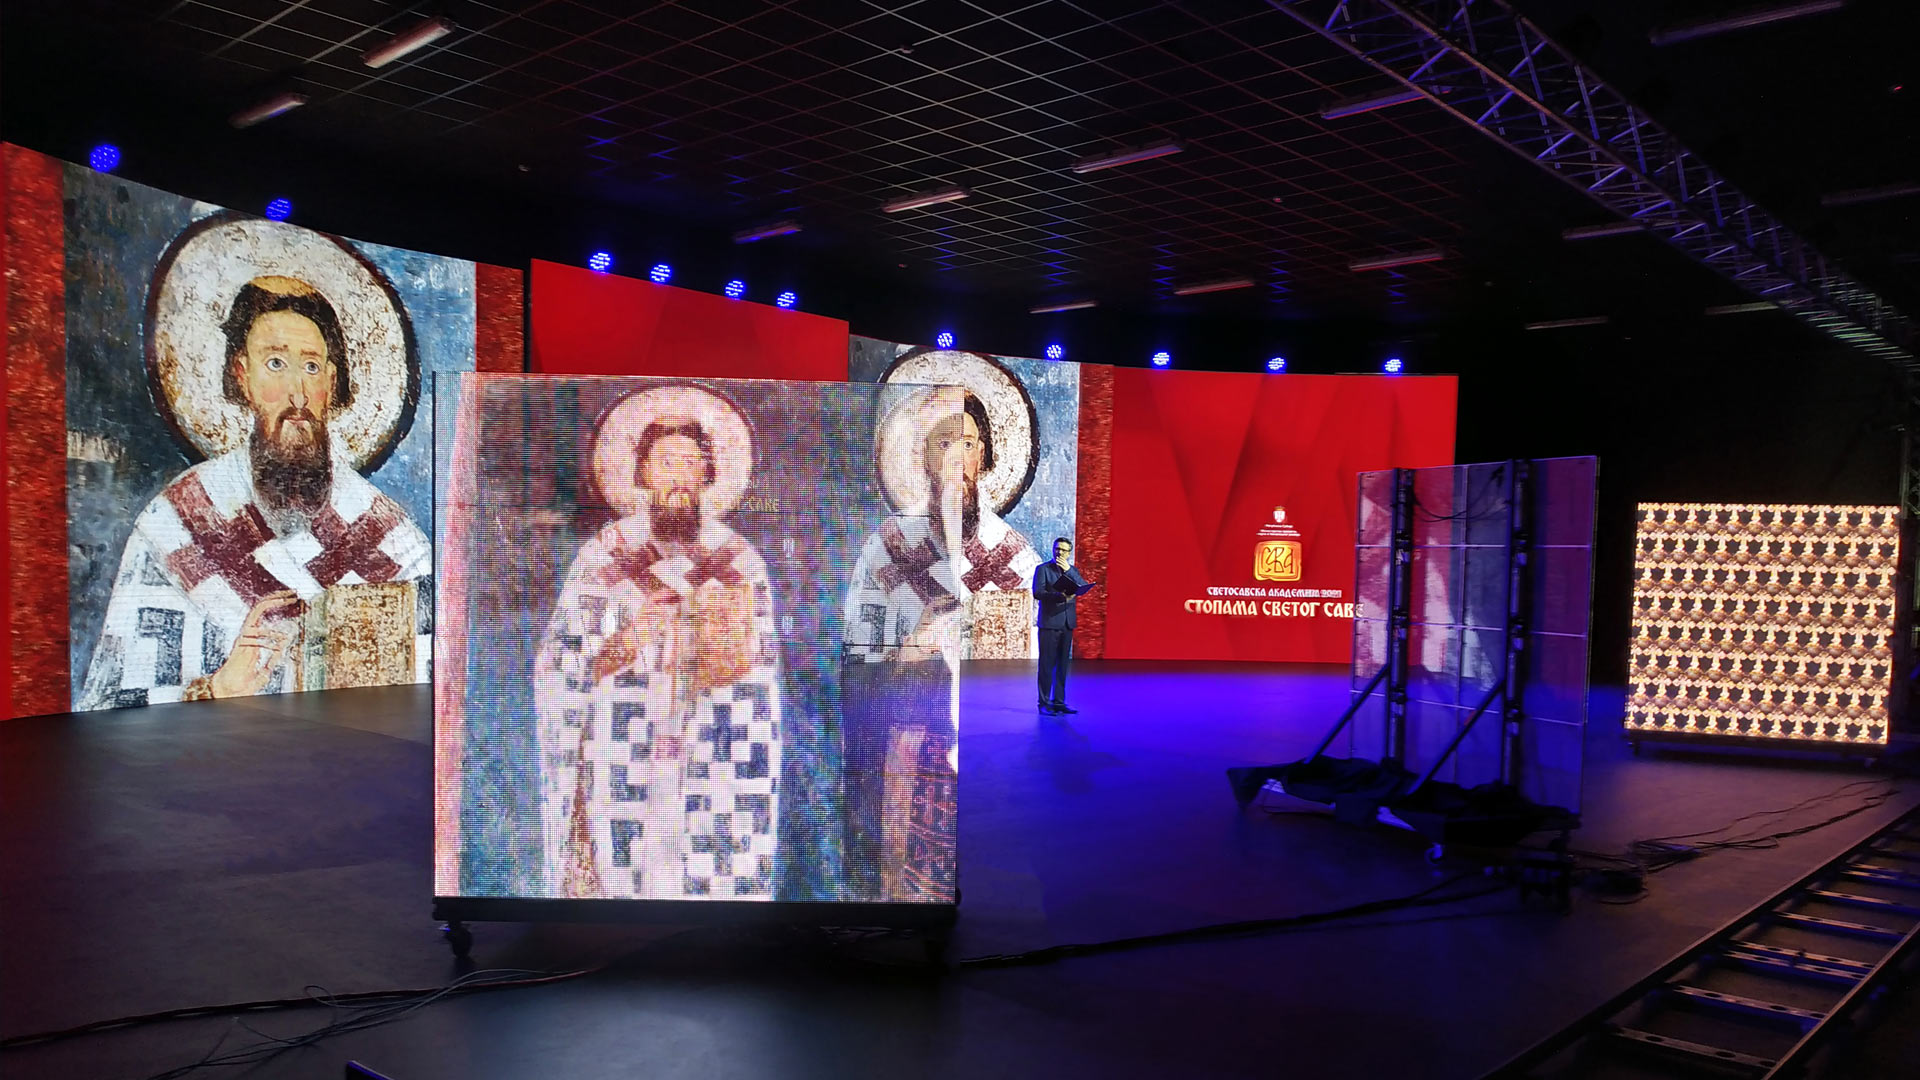 The show "Following the footsteps of St. Sava"